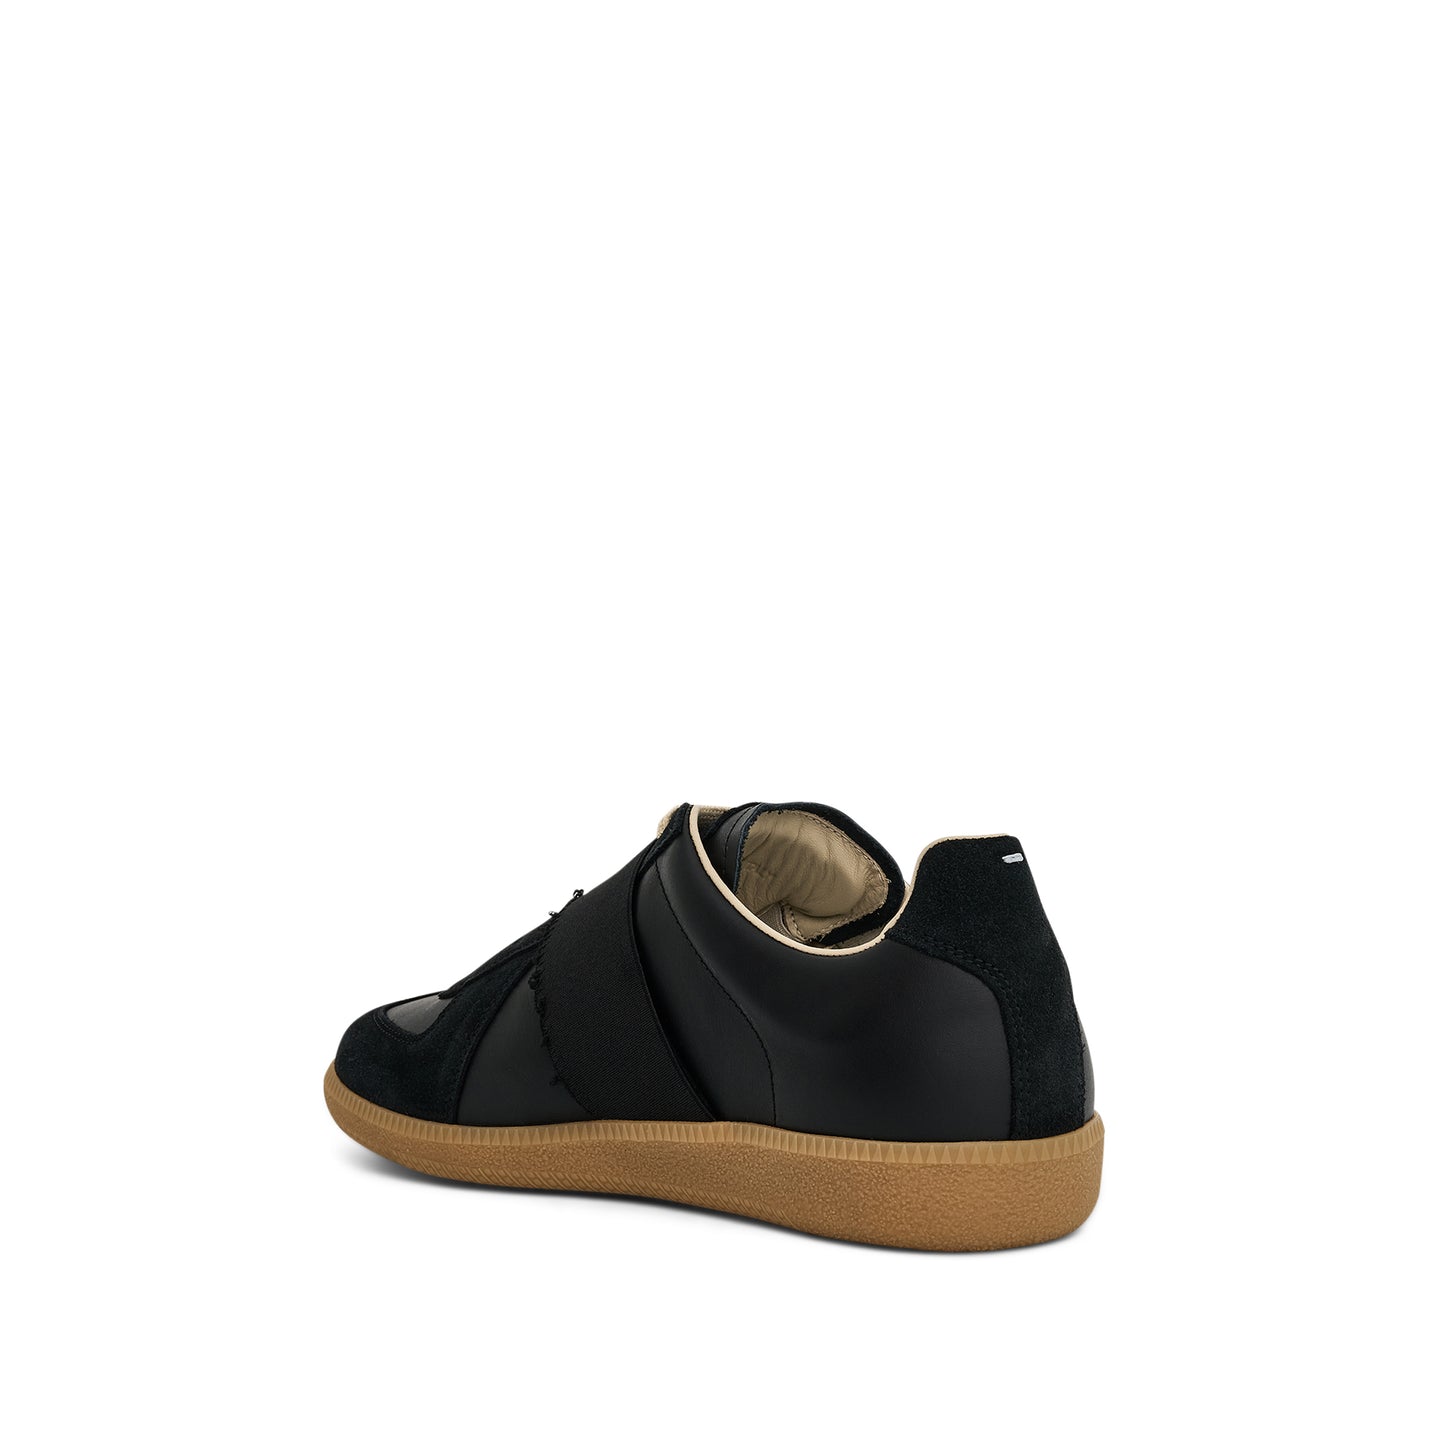 Replica Sneakers with Elastic Band in Black